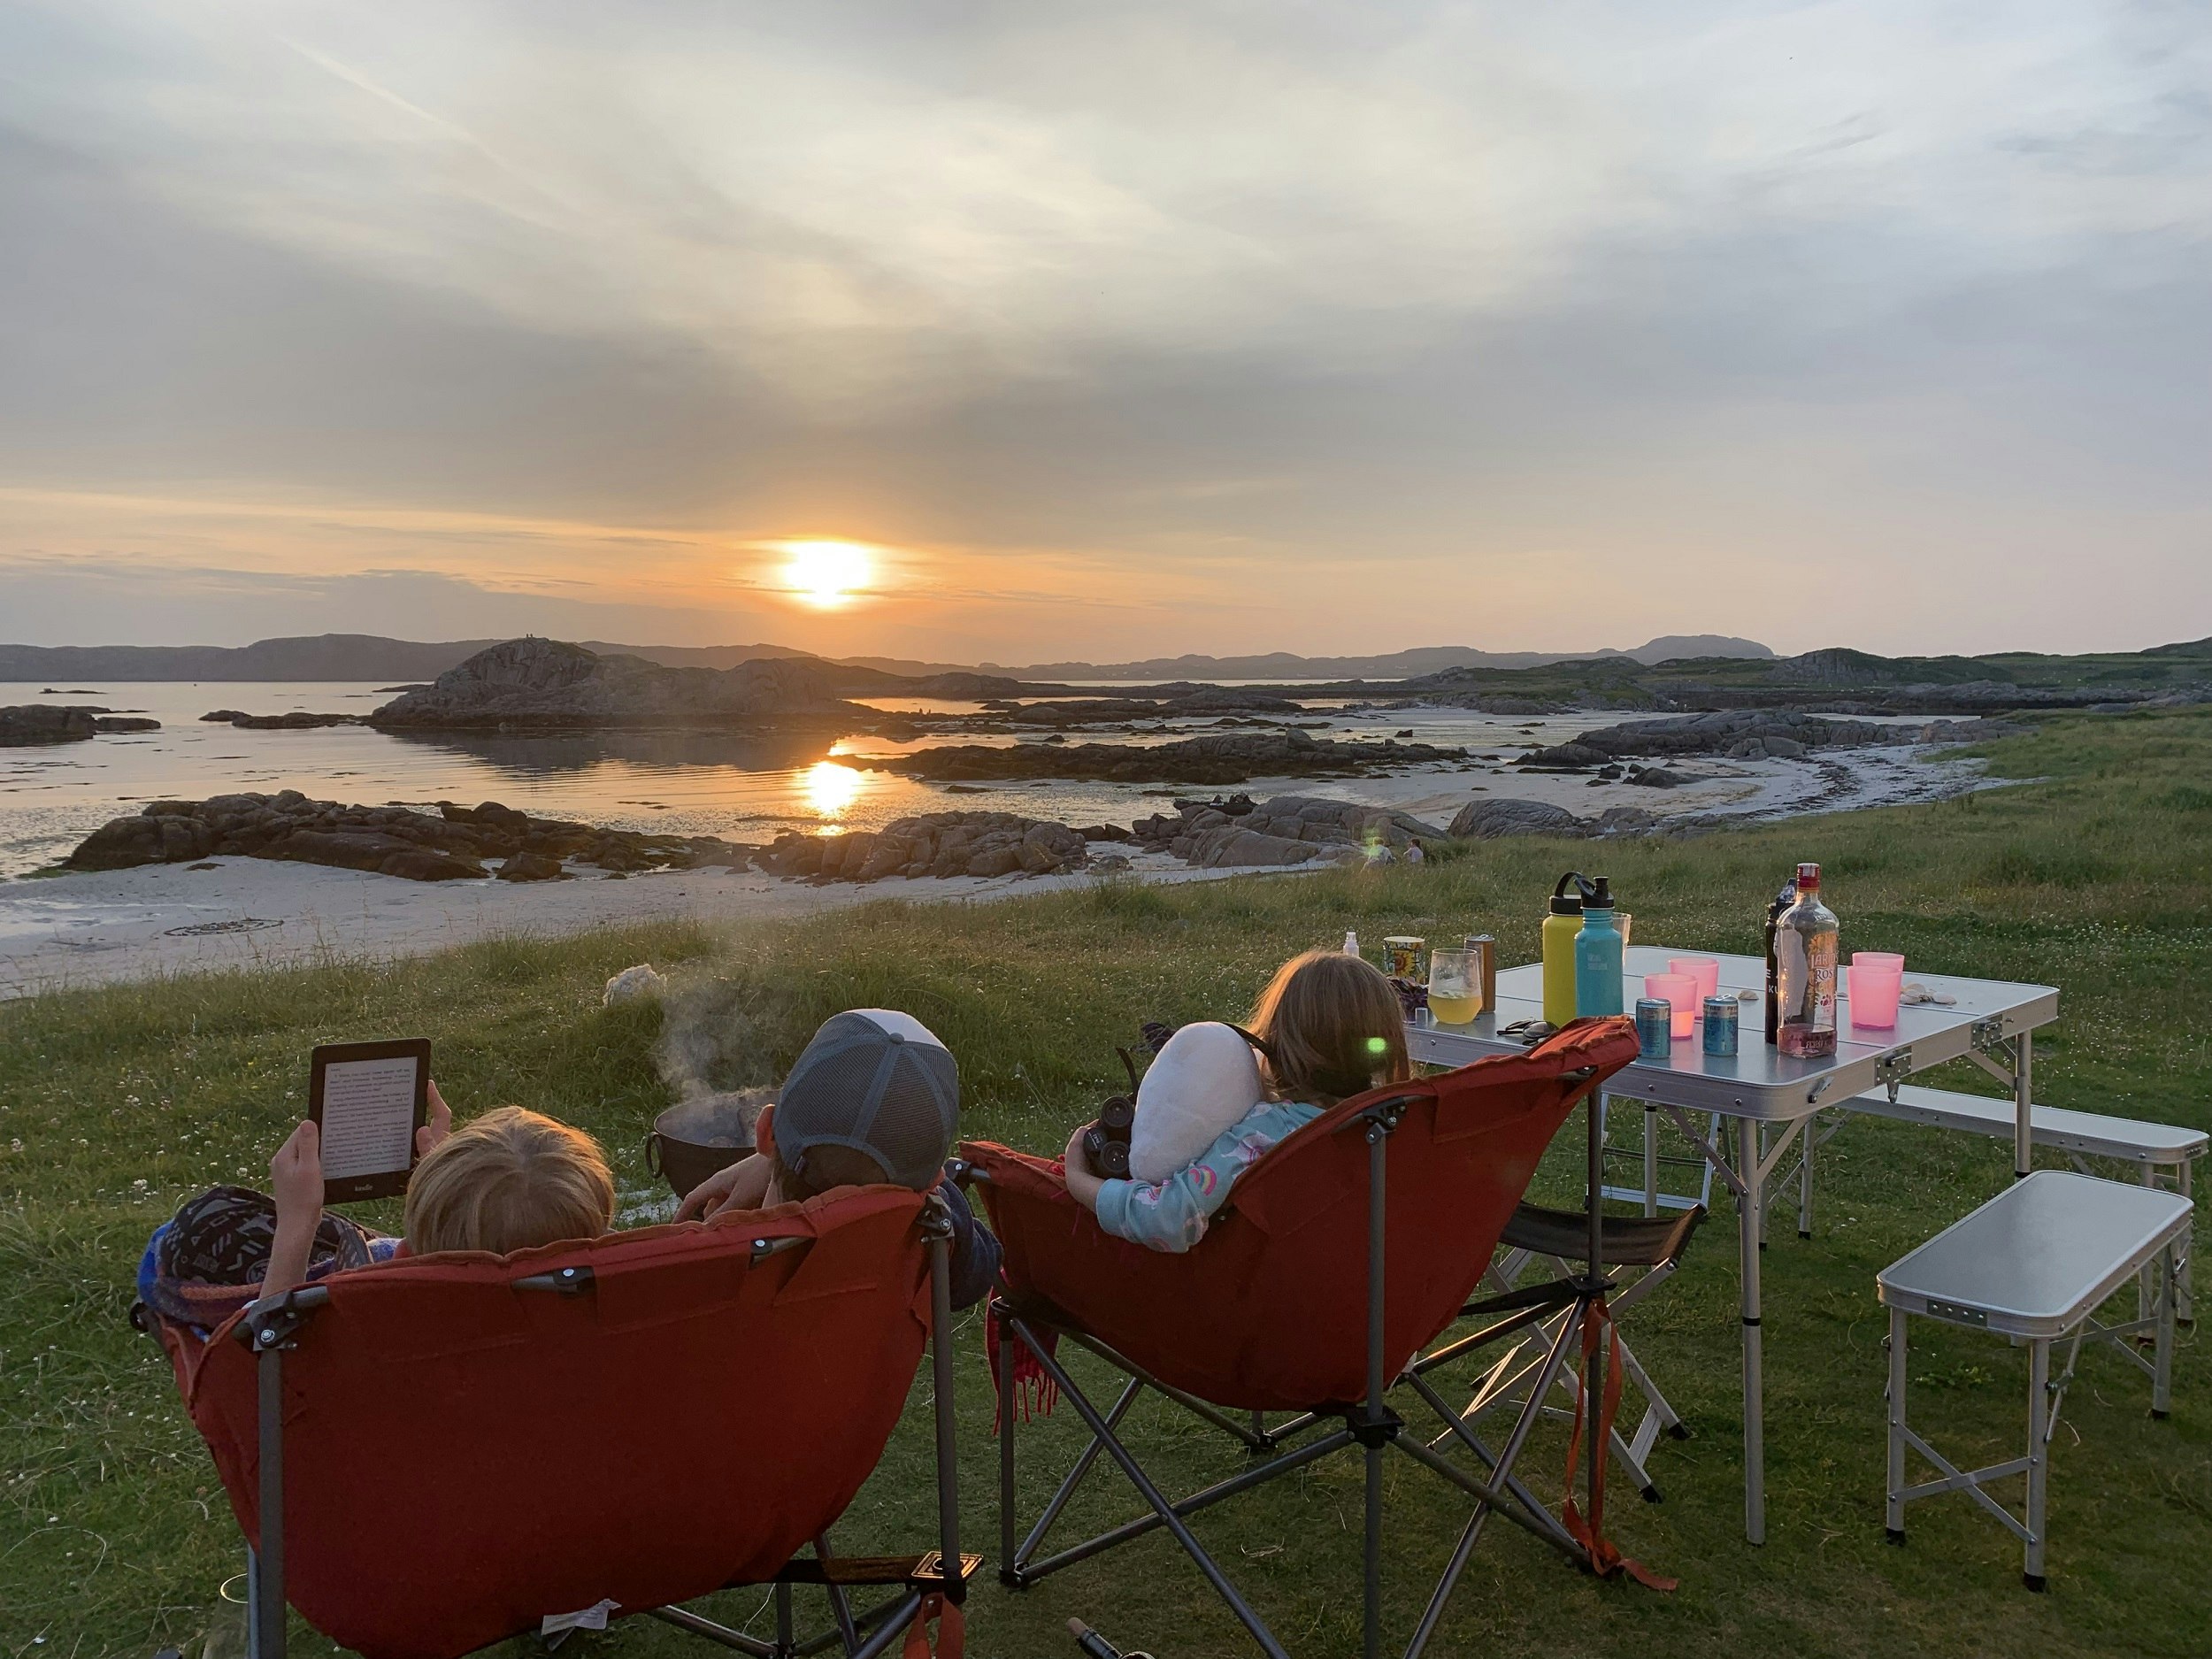 A dad and two children sitting in camping chairs watch the sun set over the sea.